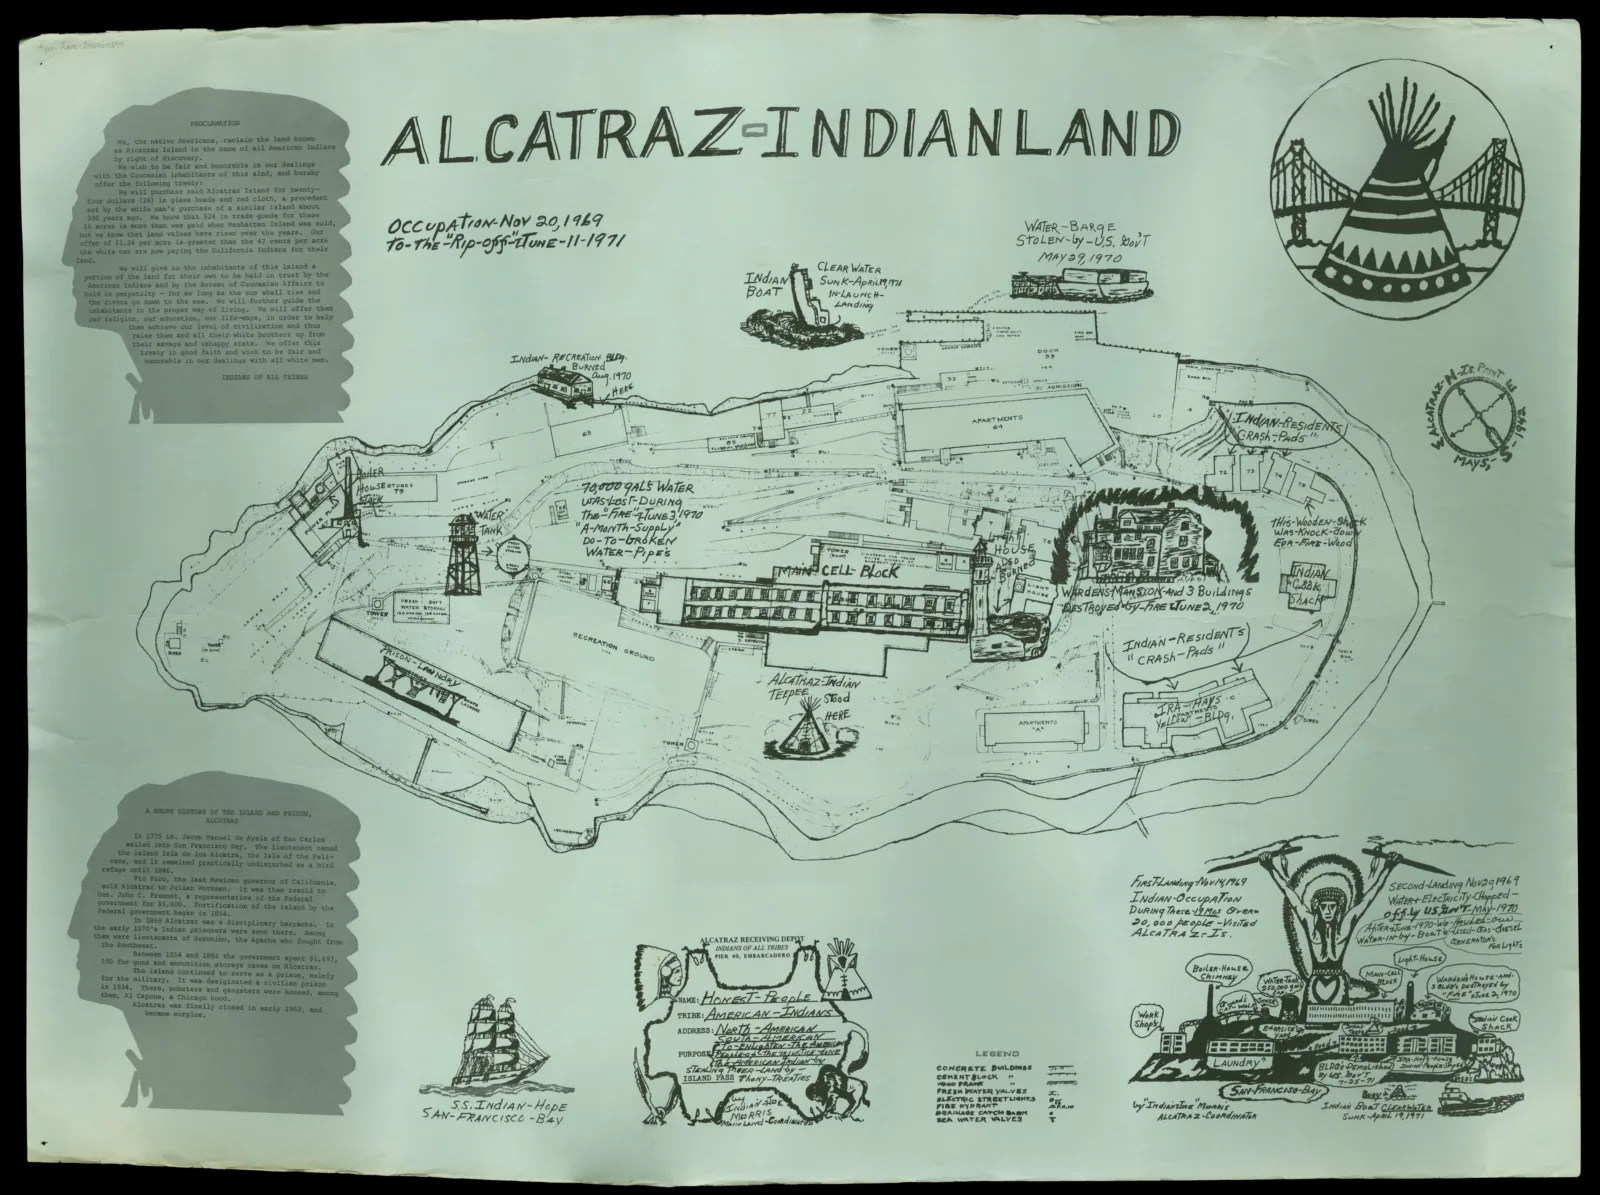 Oriented with north at upper left. Profile view of Alcatraz Island at lower right. Printed on light blue paper. Includes proclamation of Indians of All Tribes and text on the history of Alcatraz Island and prison.